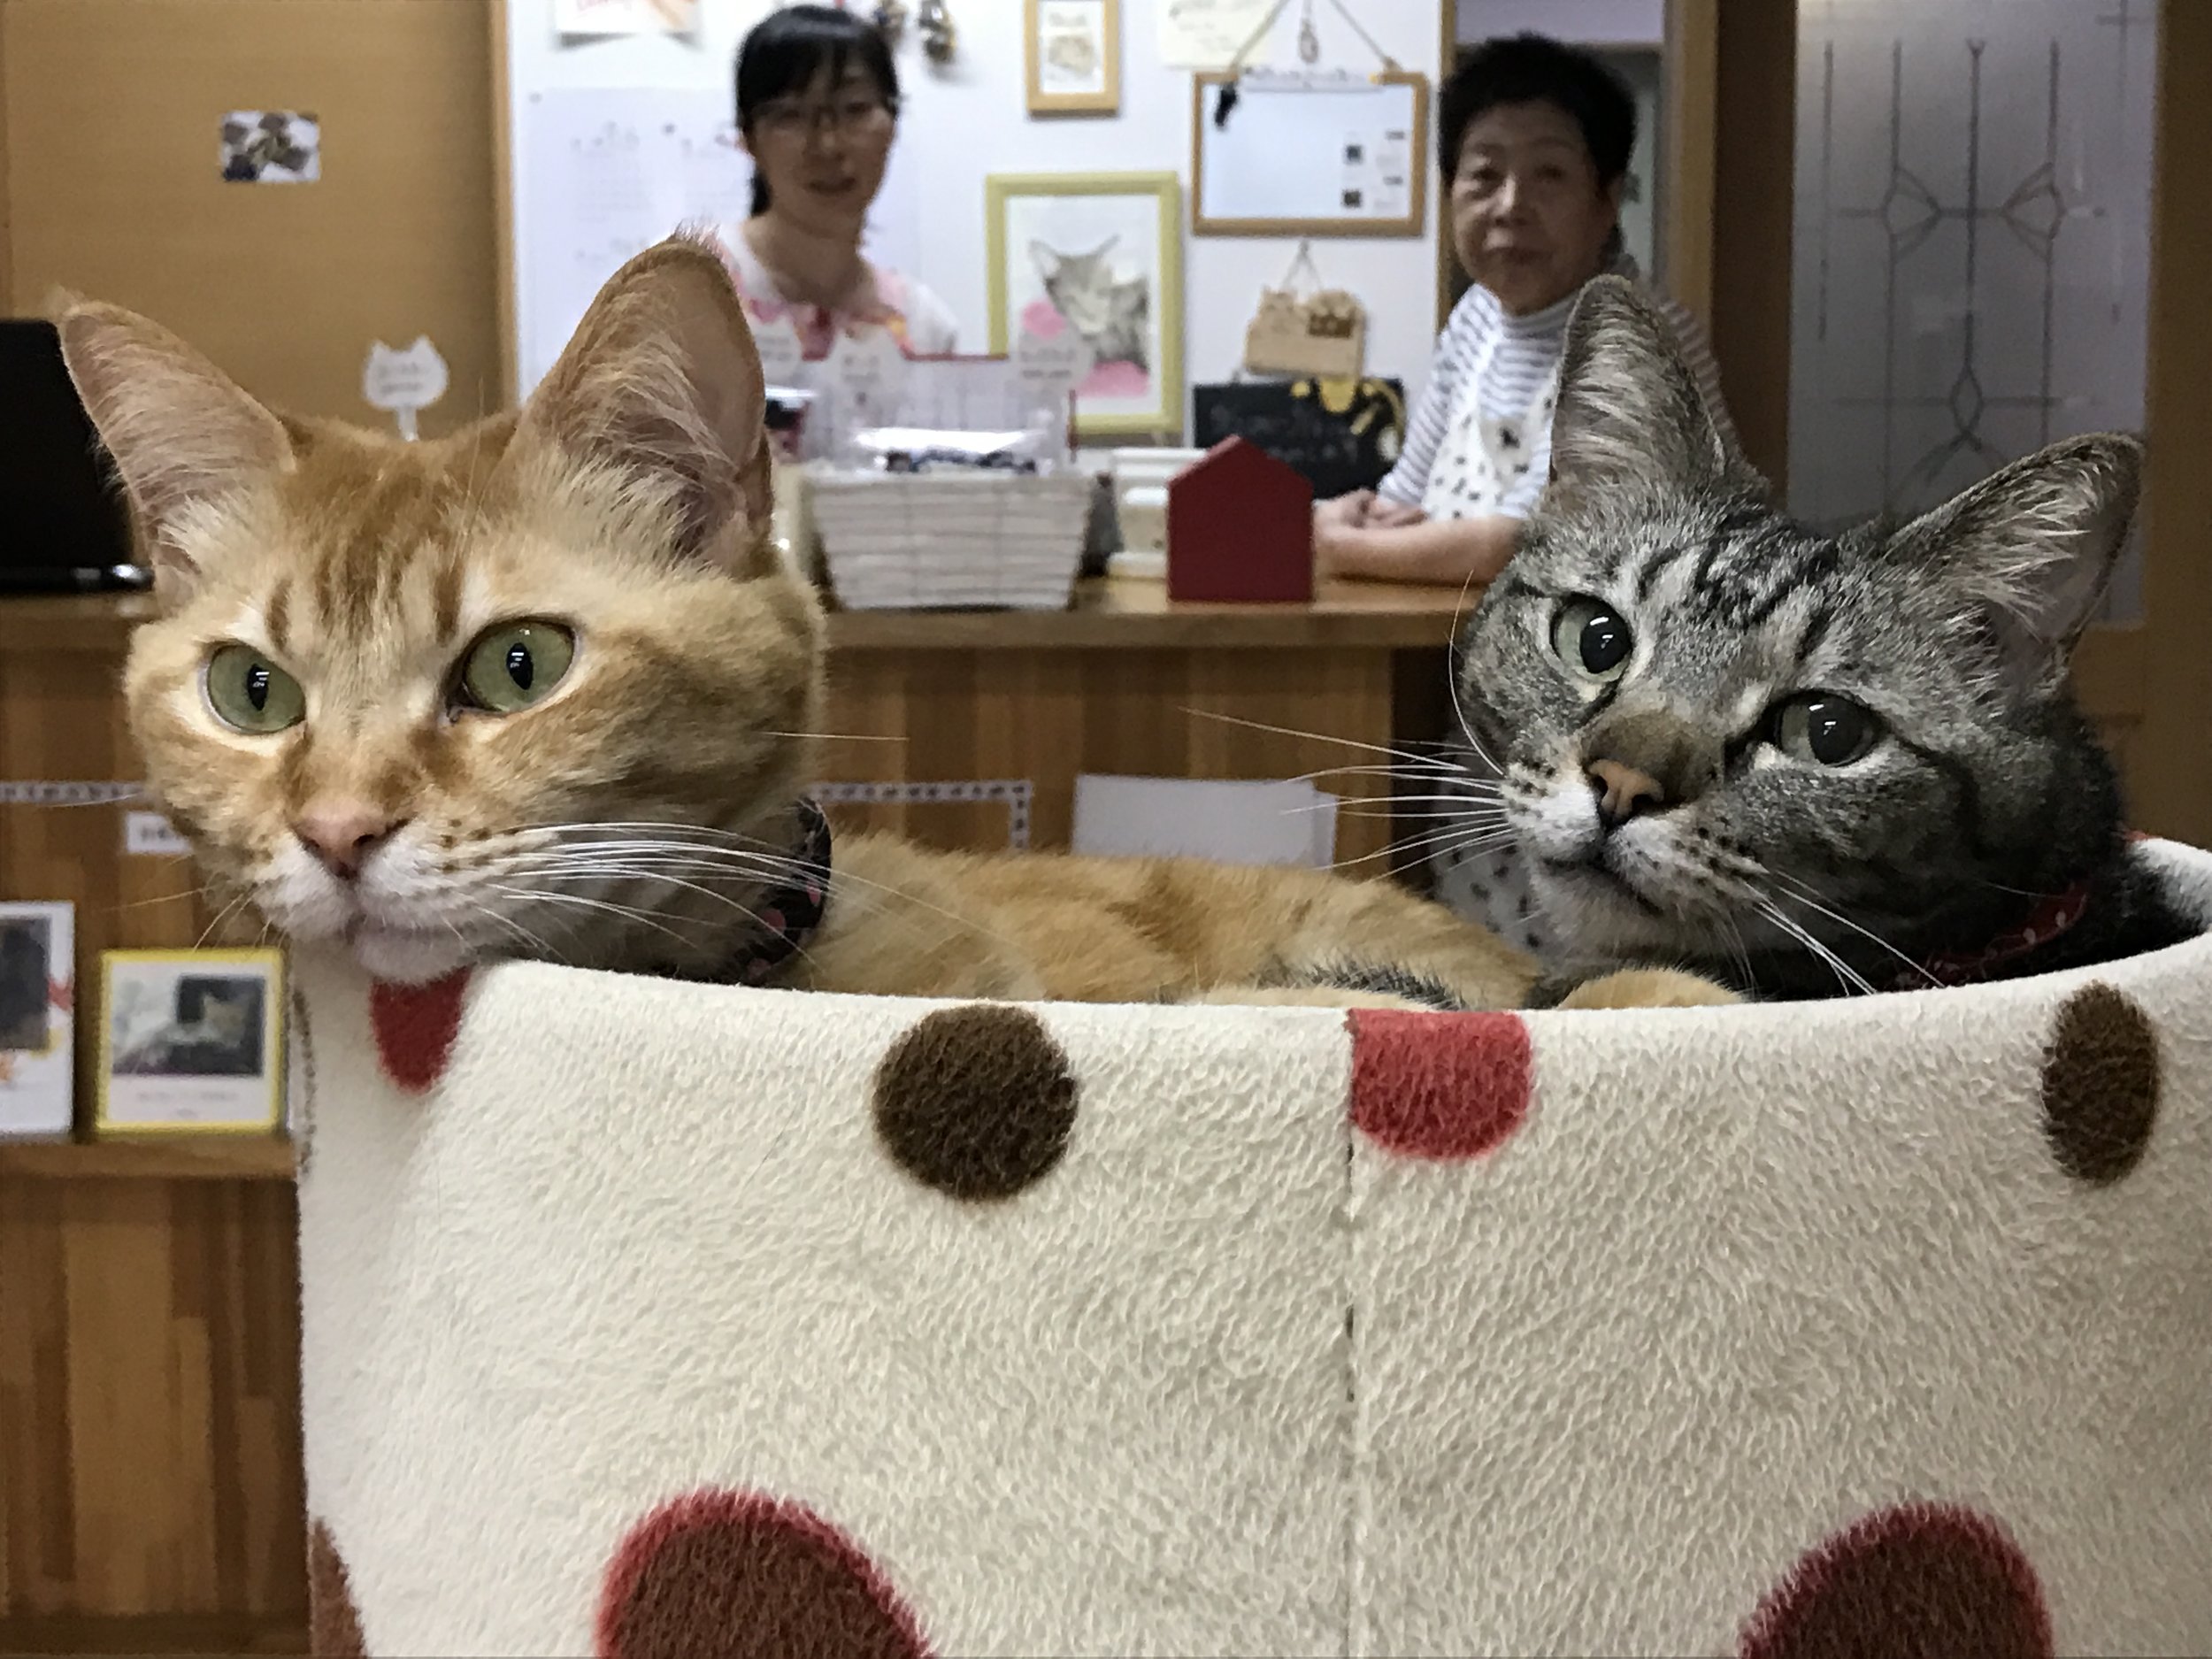 All of the 13 cats at Cat Cafe Nekokaigi are street rescues